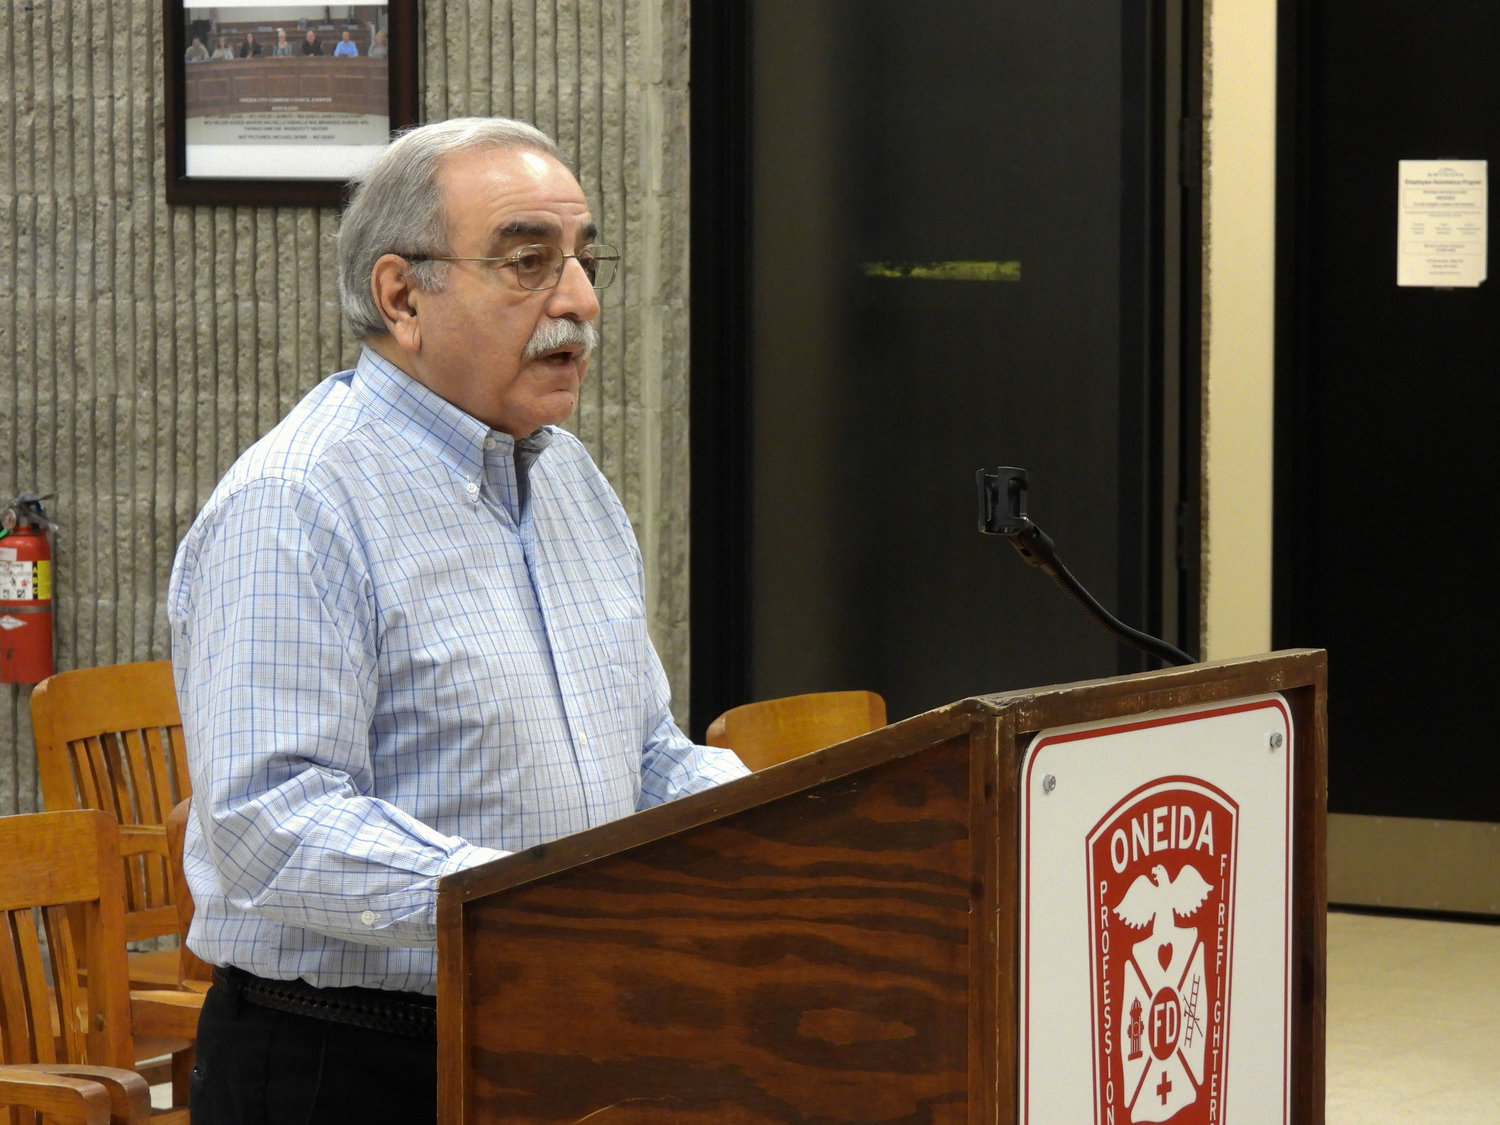 Brahim Zogby outlines his opposition to bonding for a sidewalk program during Tuesday night’s Common Council meeting in Oneida.